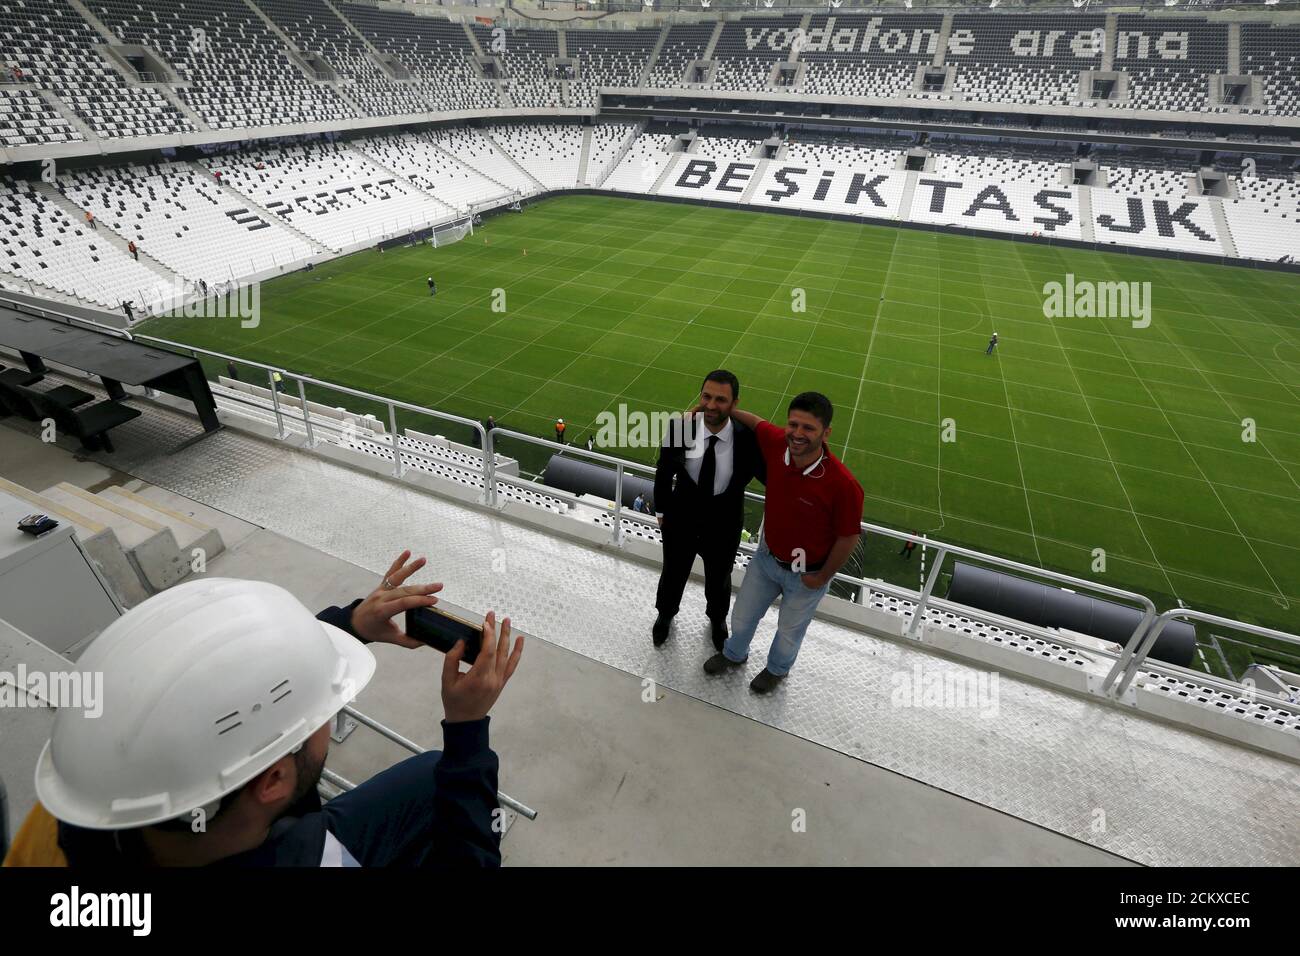 Visitors Pose For A Souvenir Photo At Vodafone Arena The New Stadium Of Besiktas Soccer Team In Istanbul Turkey April 8 16 Picture Taken April 8 16 Reuters Murad Sezer Stock Photo Alamy